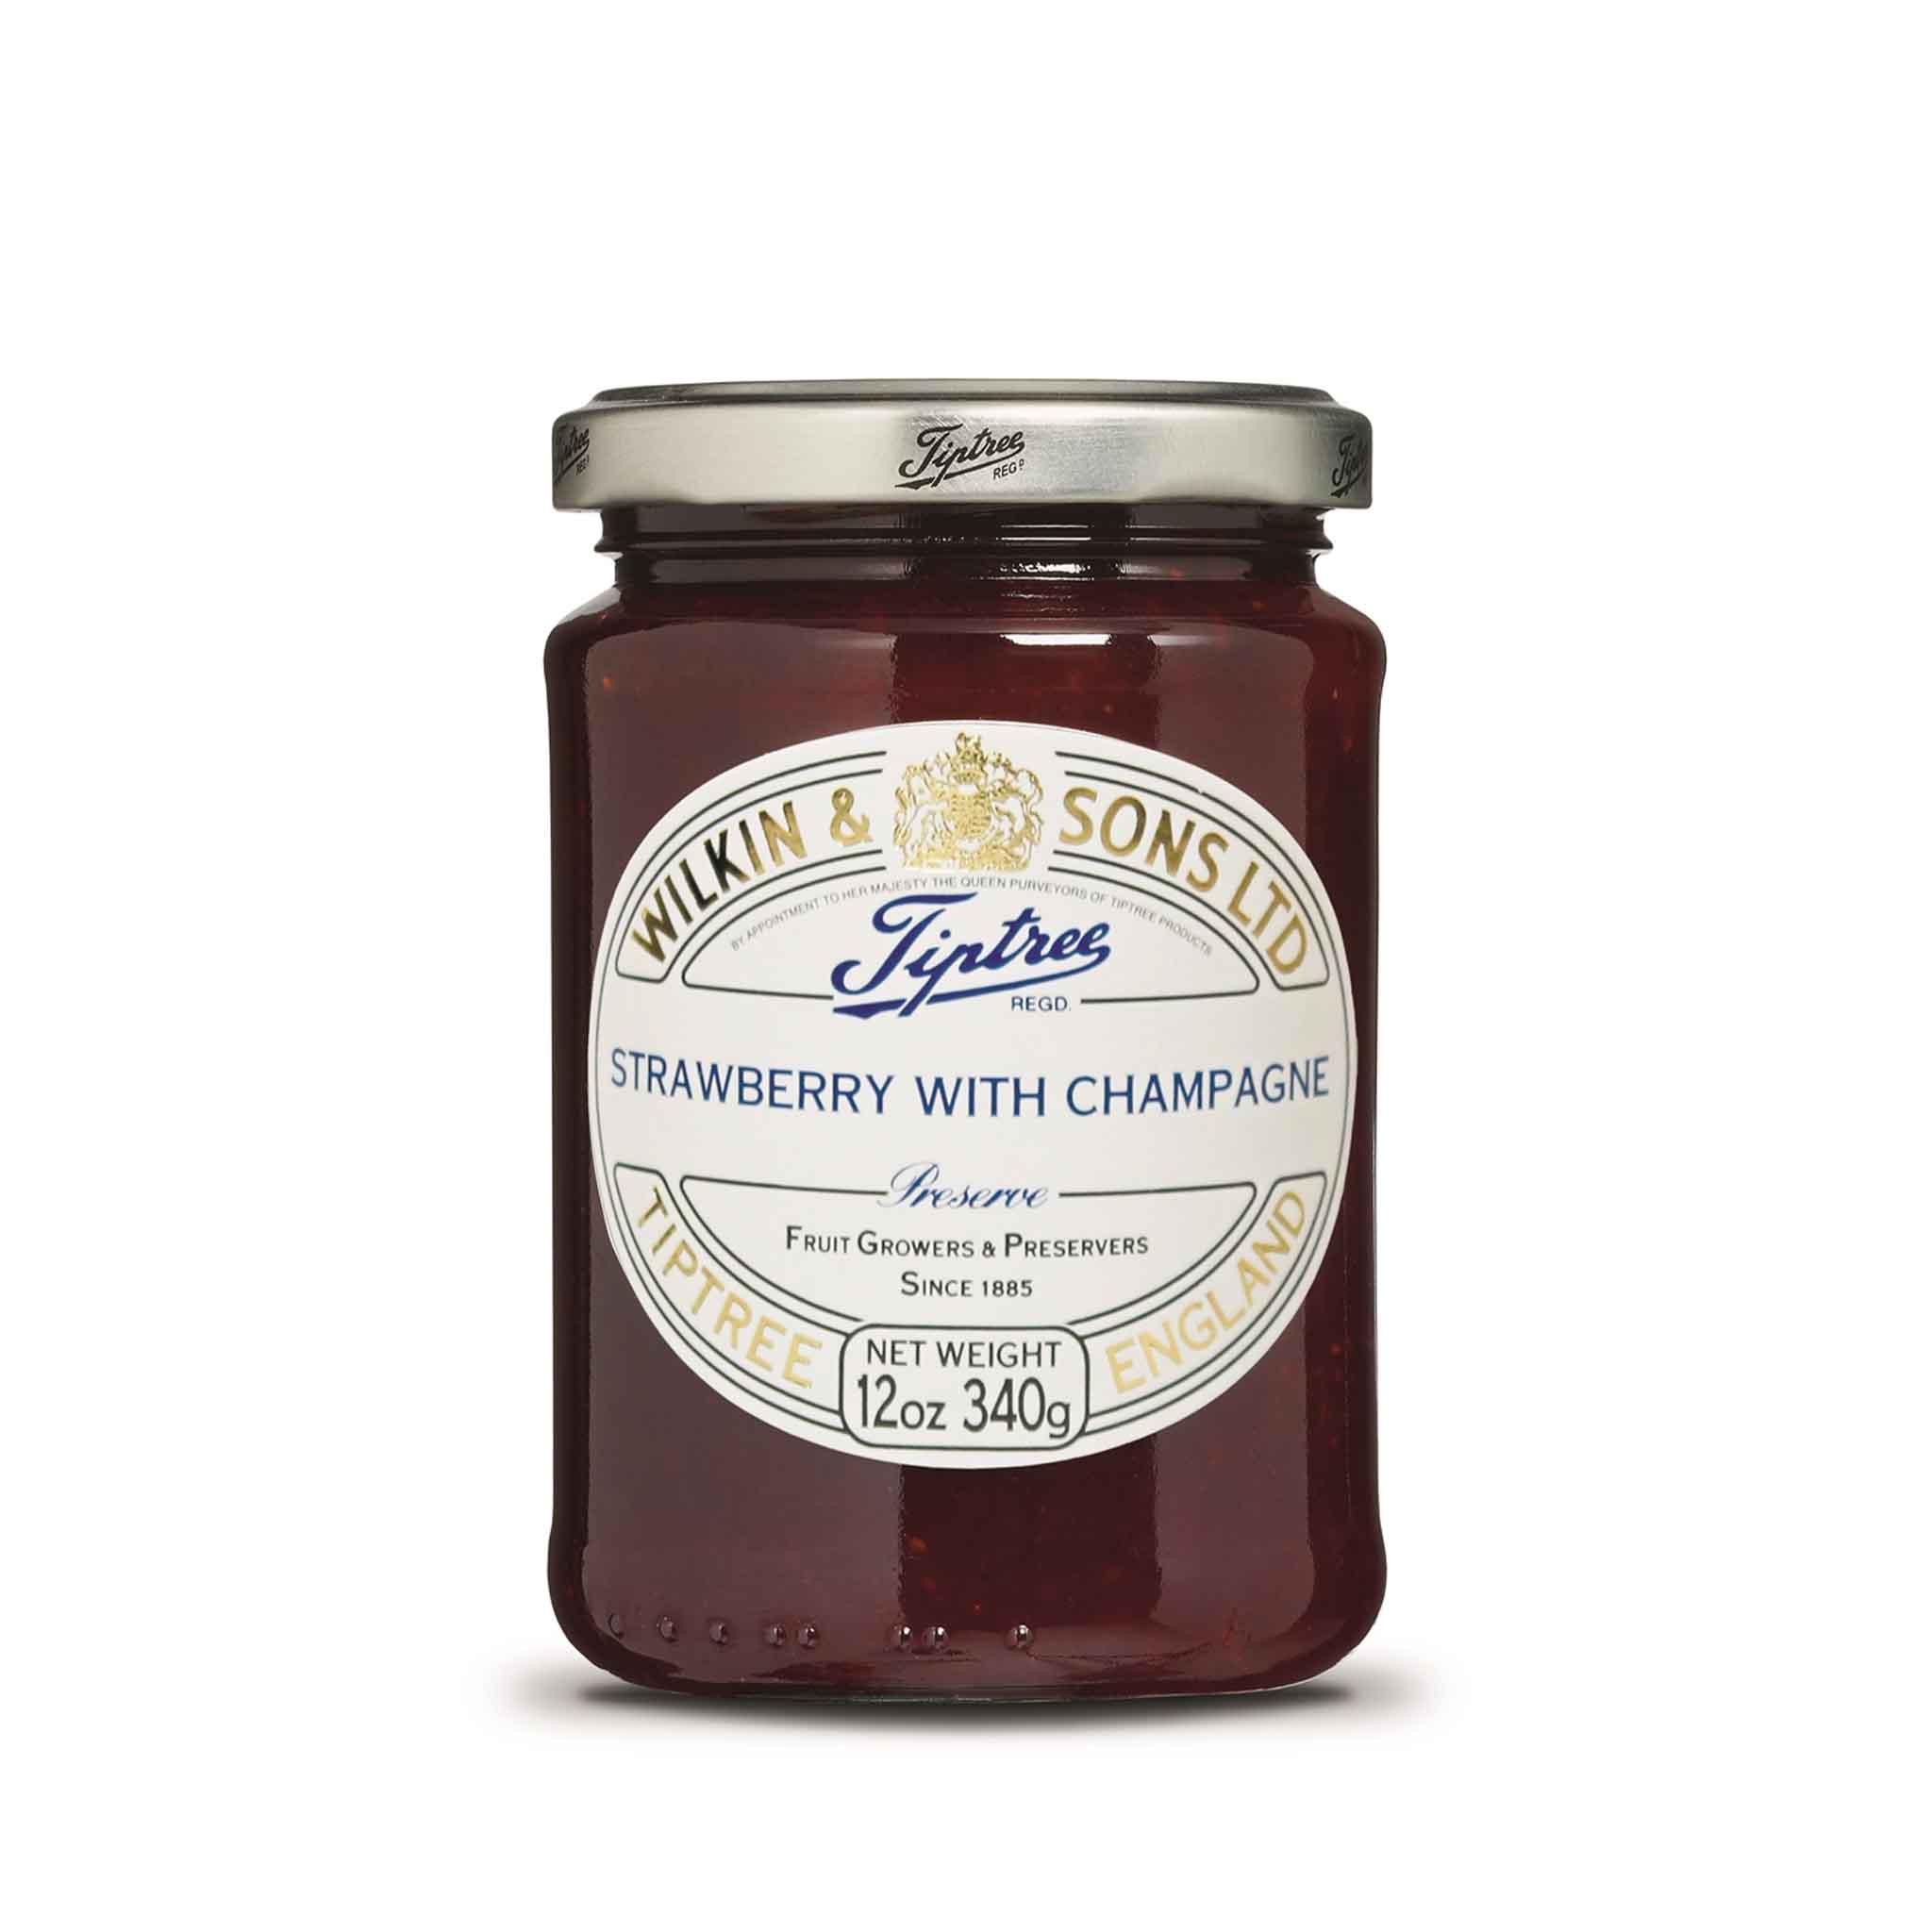 WILKIN & SONS STRAWBERRY WITH CHAMPAGNE PRESERVES 12oz